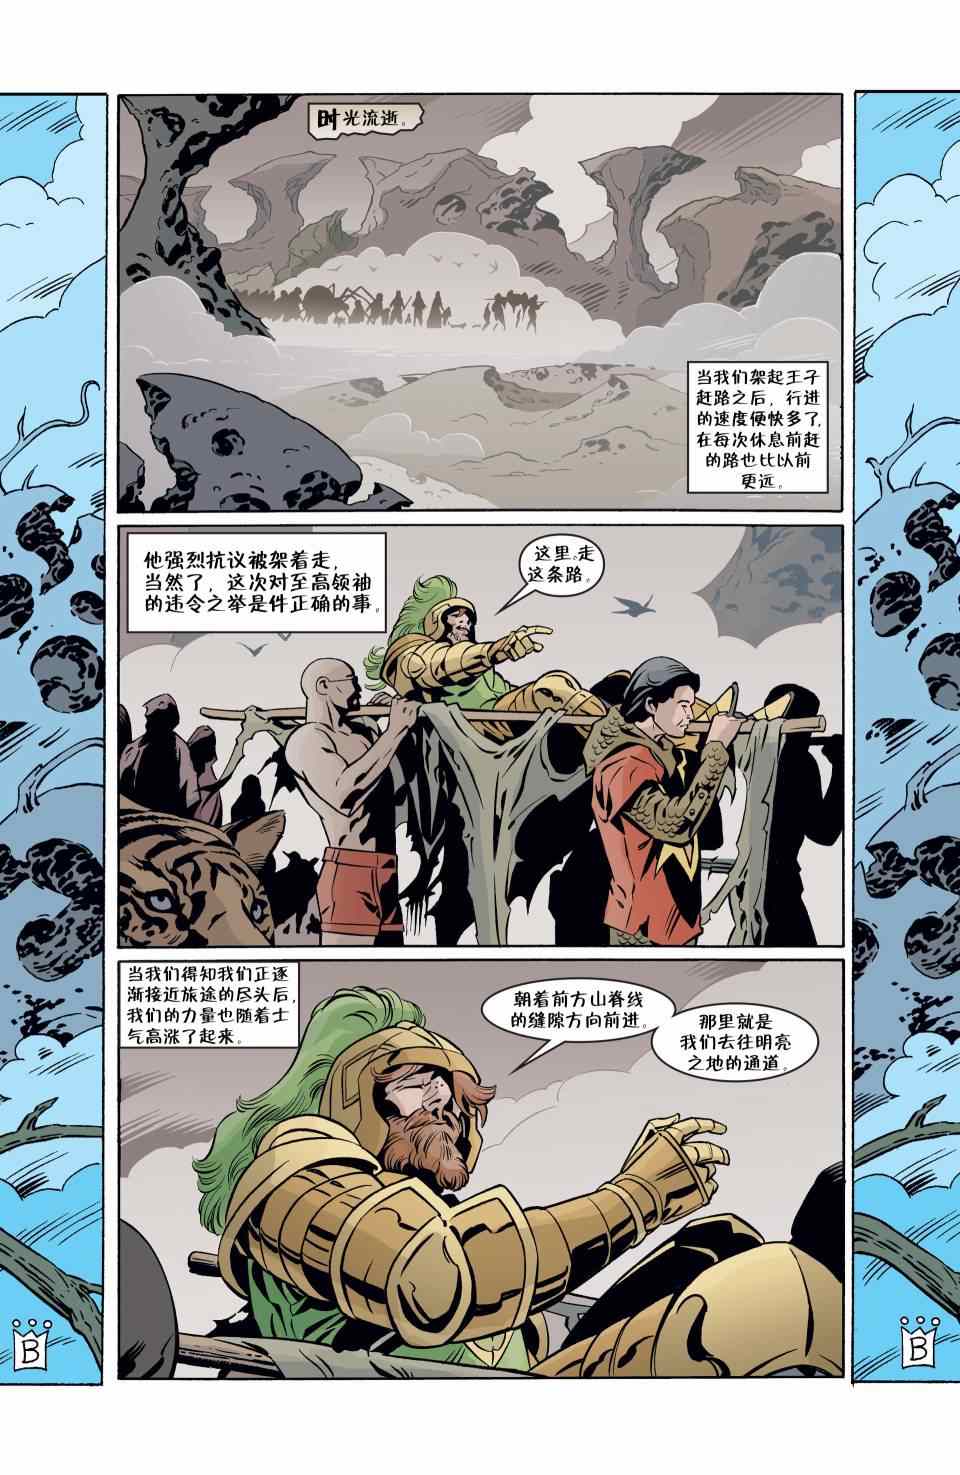 《Fables》漫画 065卷